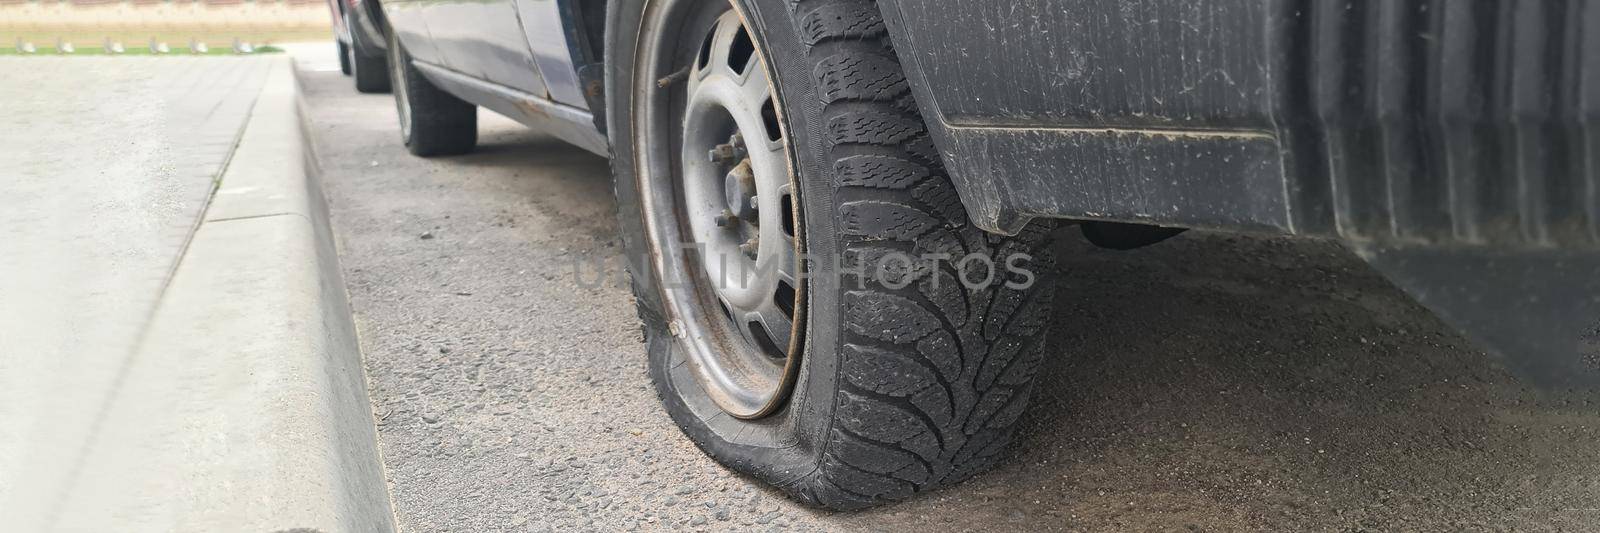 Car with flat tire standing near sidewalk closeup by kuprevich